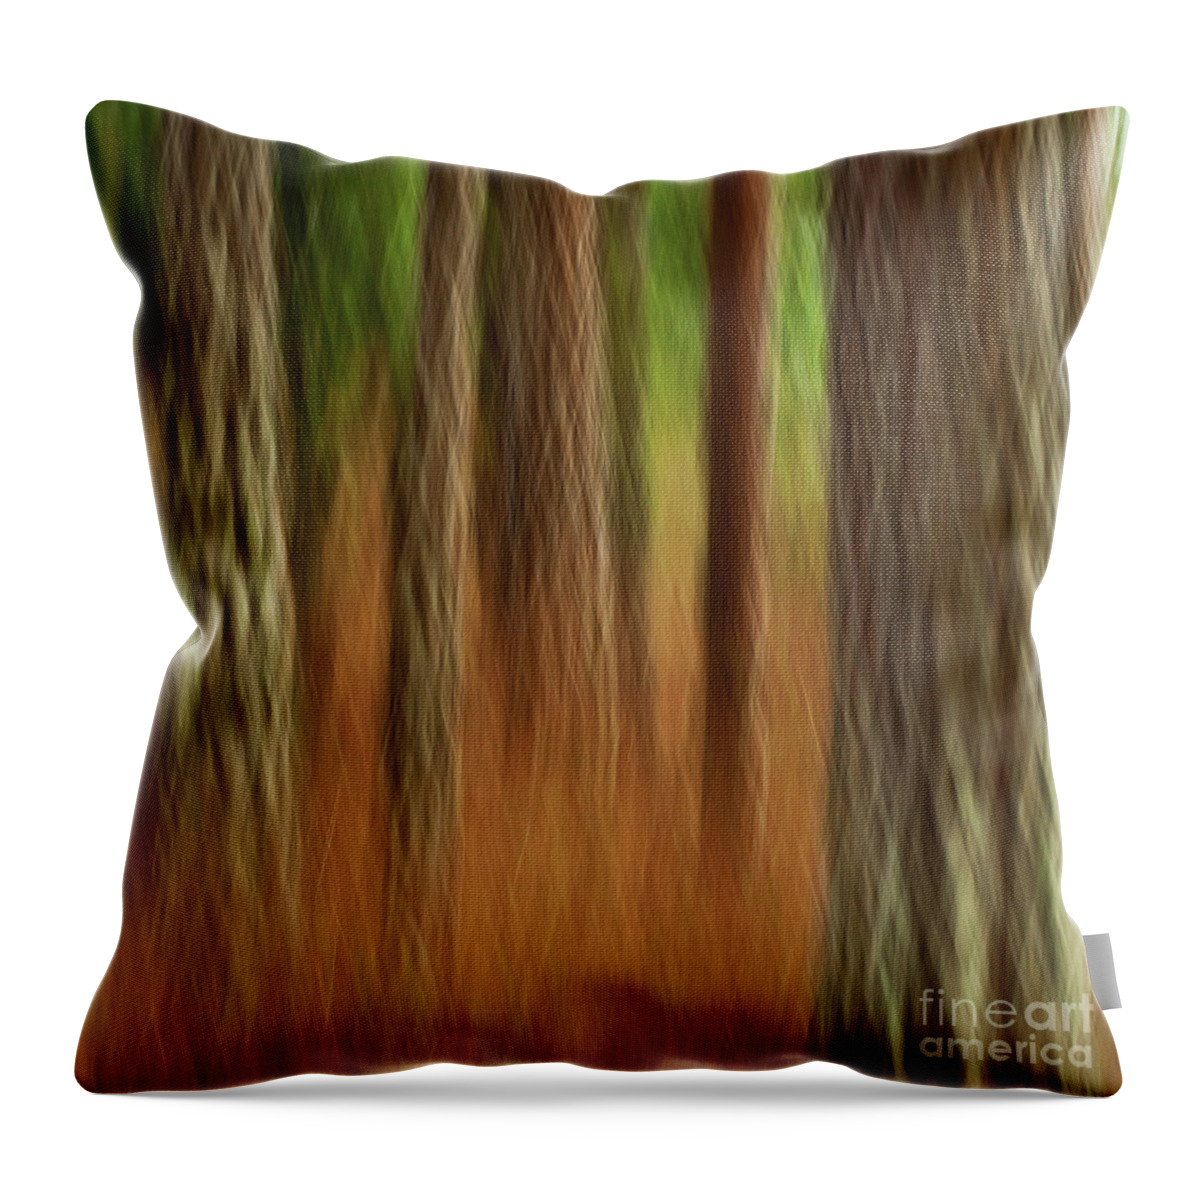 Abstract Throw Pillow featuring the photograph Pine Trees #2 by Heiko Koehrer-Wagner